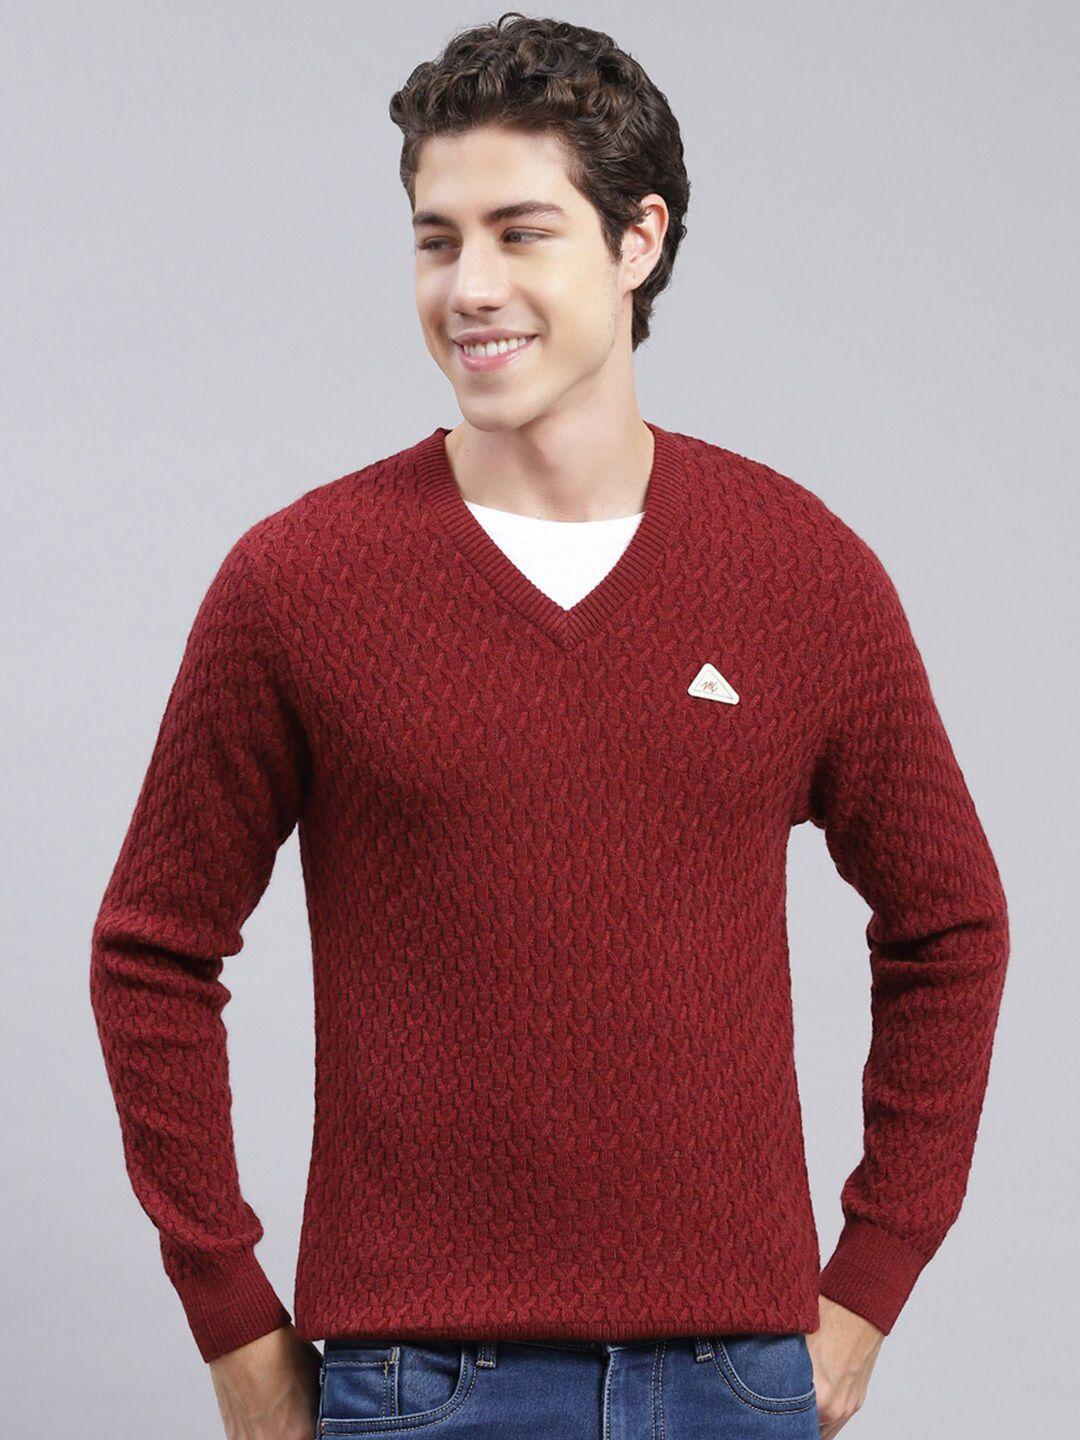 Monte Carlo Self Design Cable Knit Woollen Pullover Sweaters